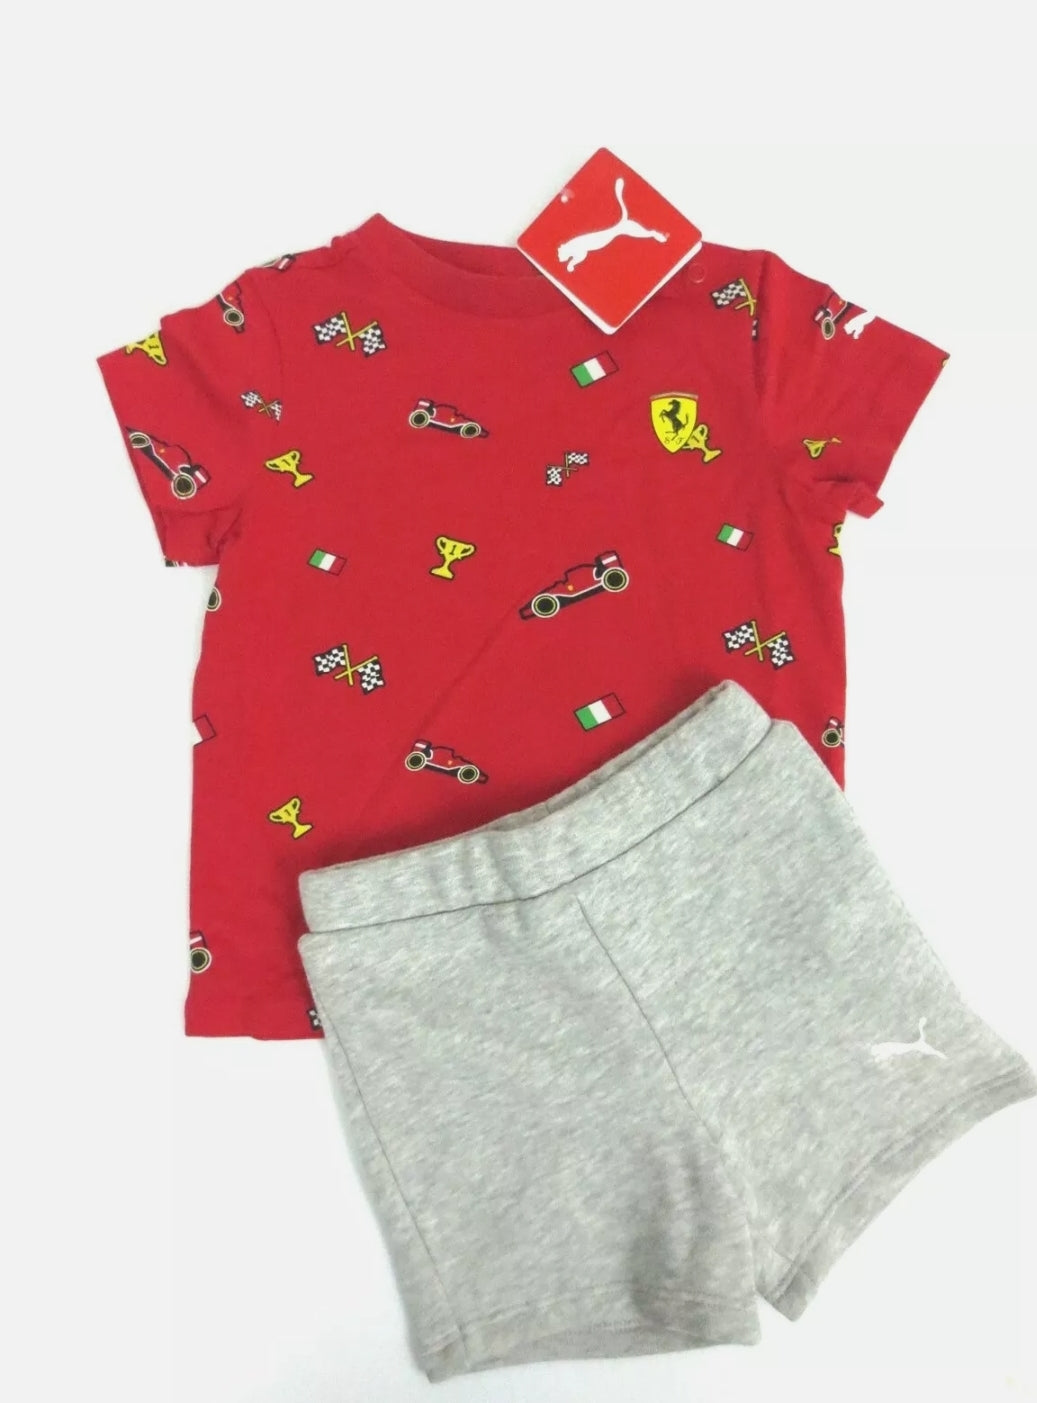 Scuderia Ferrari Puma Infant Graphic Two-Piece Set with Shorts - Kids - Red and Grey